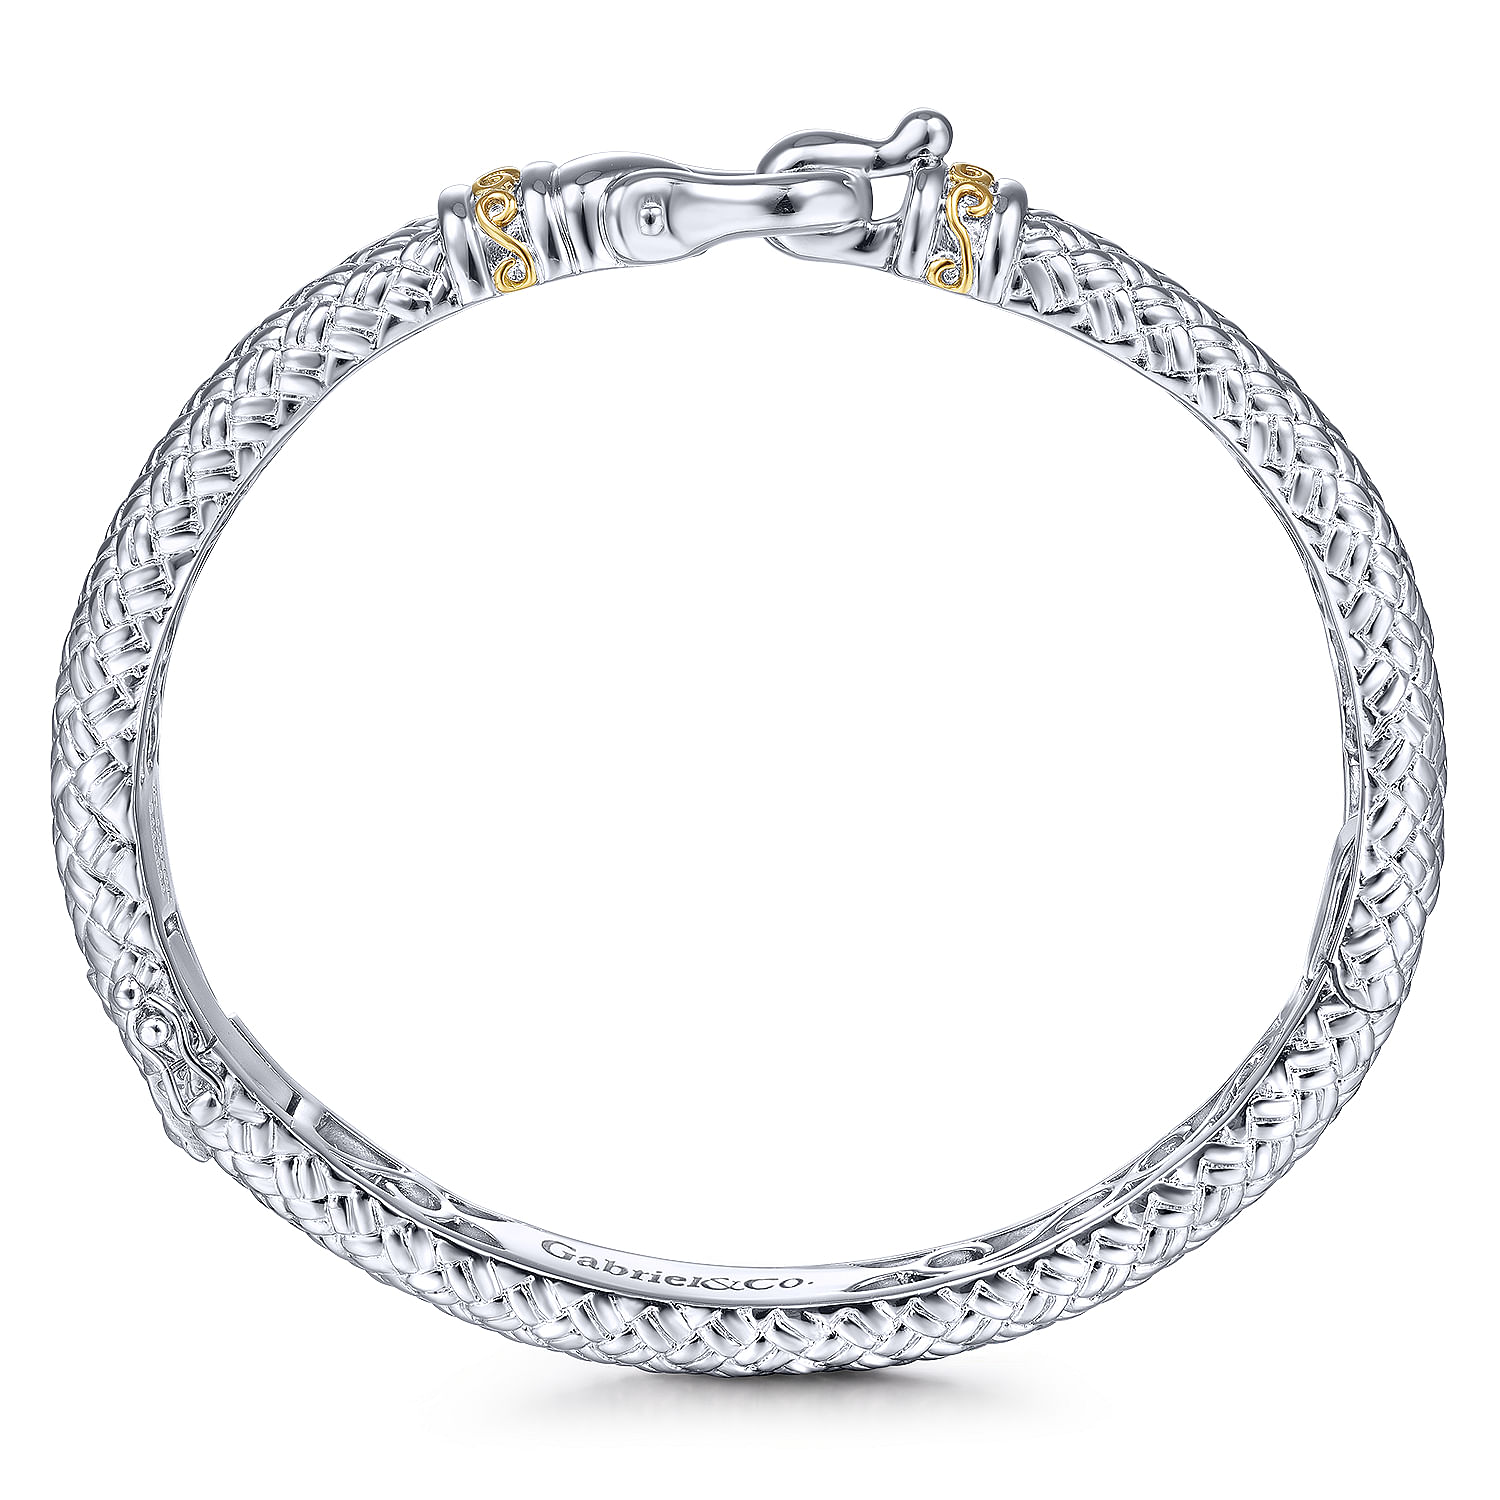 925 Sterling Silver-18K Yellow Gold Textured Bangle with Lock